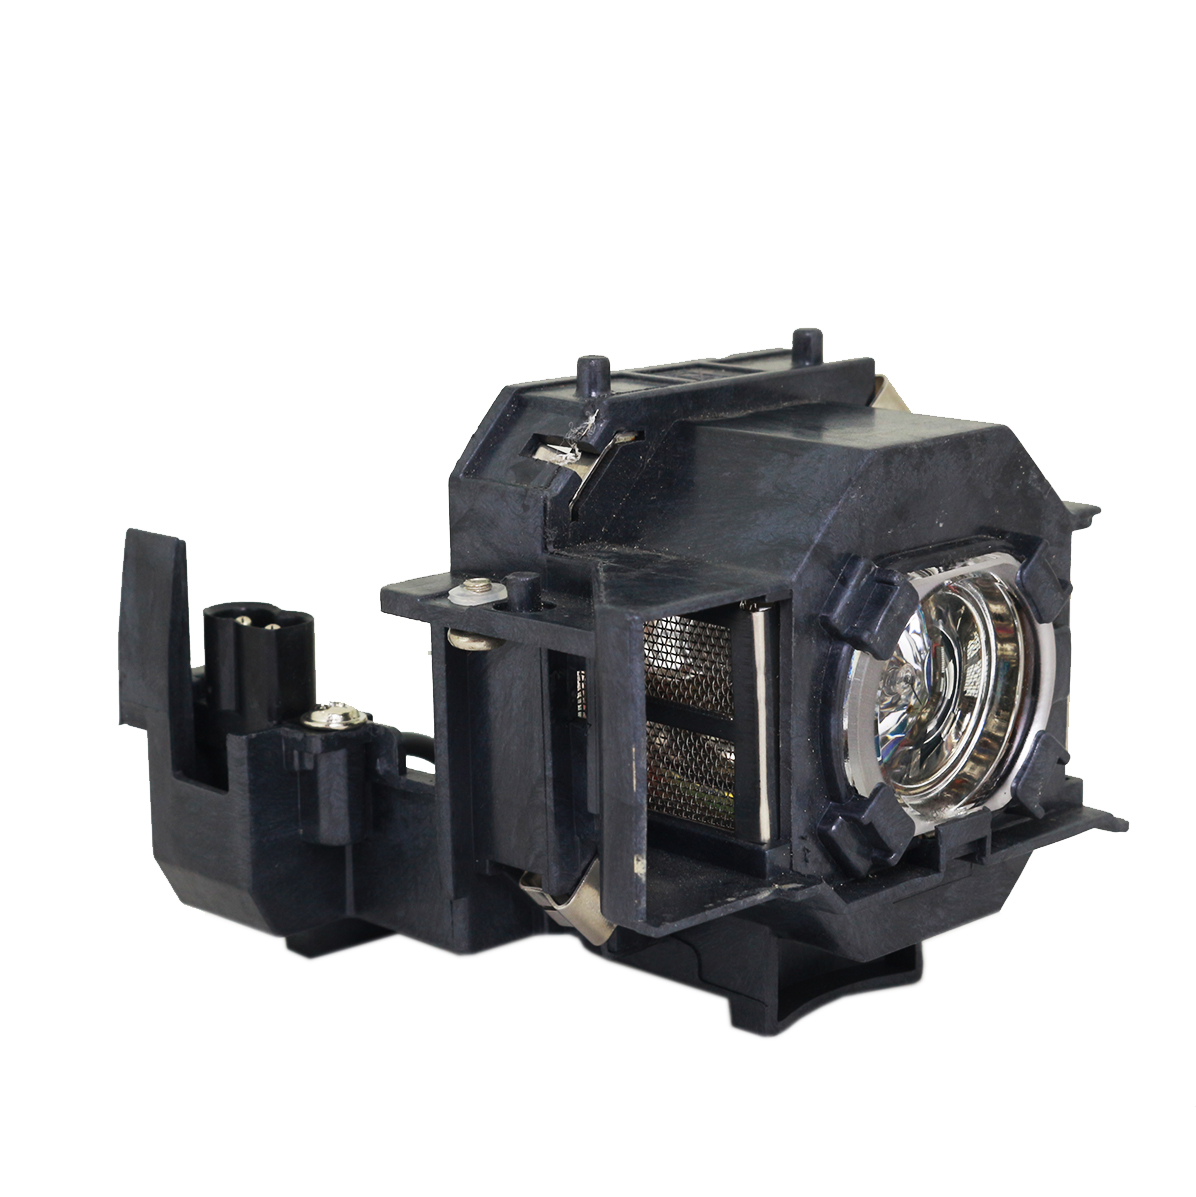 Lutema Platinum Bulb for Epson V13H010L43 Projector Lamp with Housing (Original Philips Inside) - image 2 of 6